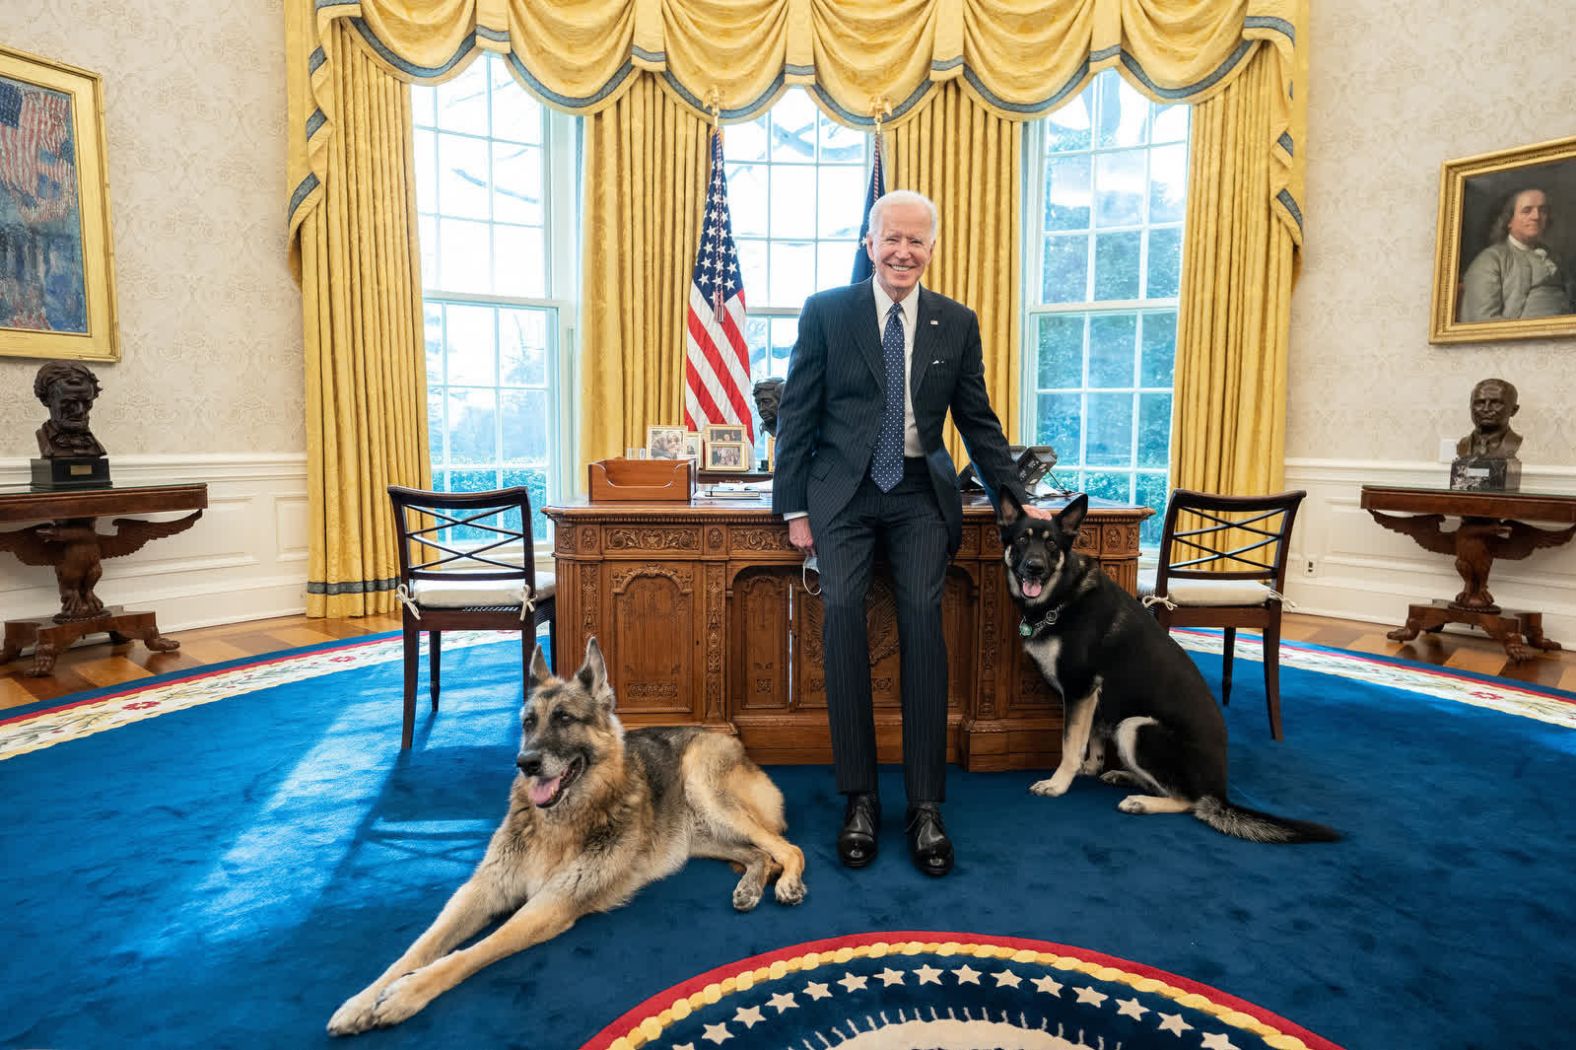 Biden poses with his dogs, Champ and Major, in the Oval Office in February 2021. The German shepherds marked a return to a <a href="http://www.cnn.com/2013/08/20/politics/gallery/presidential-pets/index.html" target="_blank">longstanding tradition</a> of Presidents and their families bringing their pets with them to the White House. <a href="https://www.cnn.com/2021/06/19/politics/champ-biden-german-shepherd-dog-dies/index.html" target="_blank">Champ died</a> in June 2021 at the age of 13.